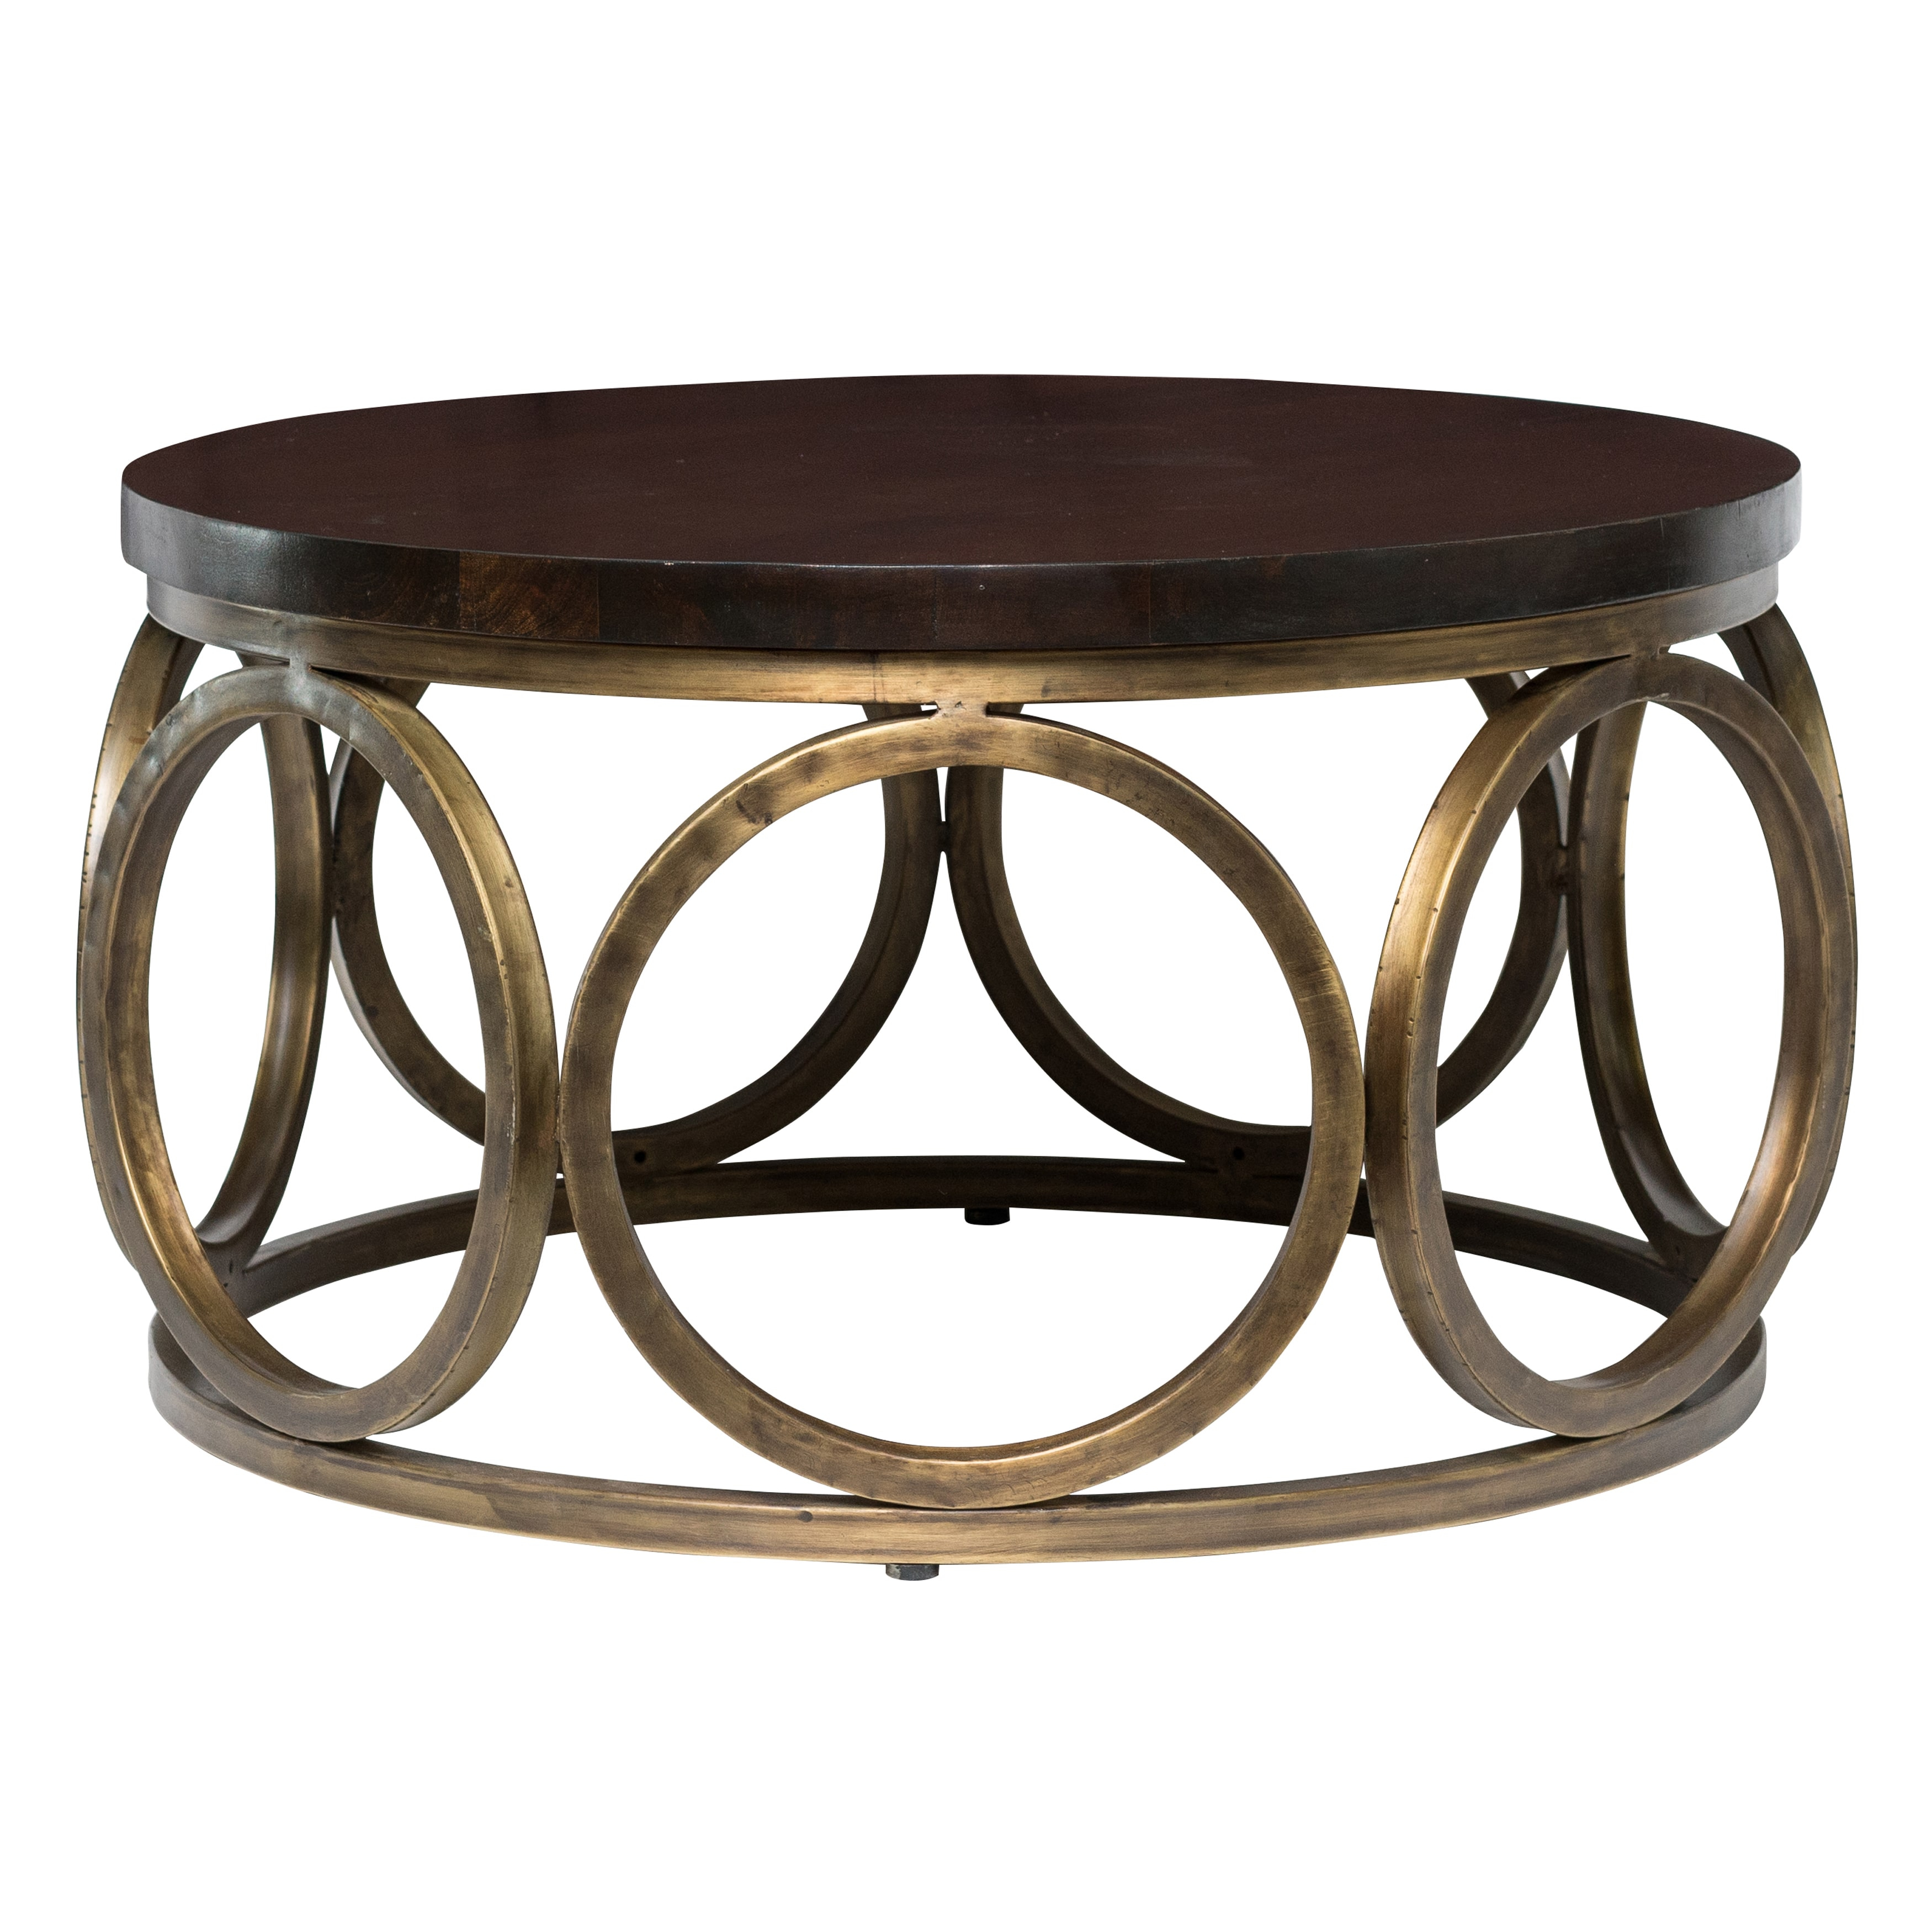 Kosas Home Gemma 32 Inch Wood Round Coffee Table Walmart within proportions 3500 X 3500